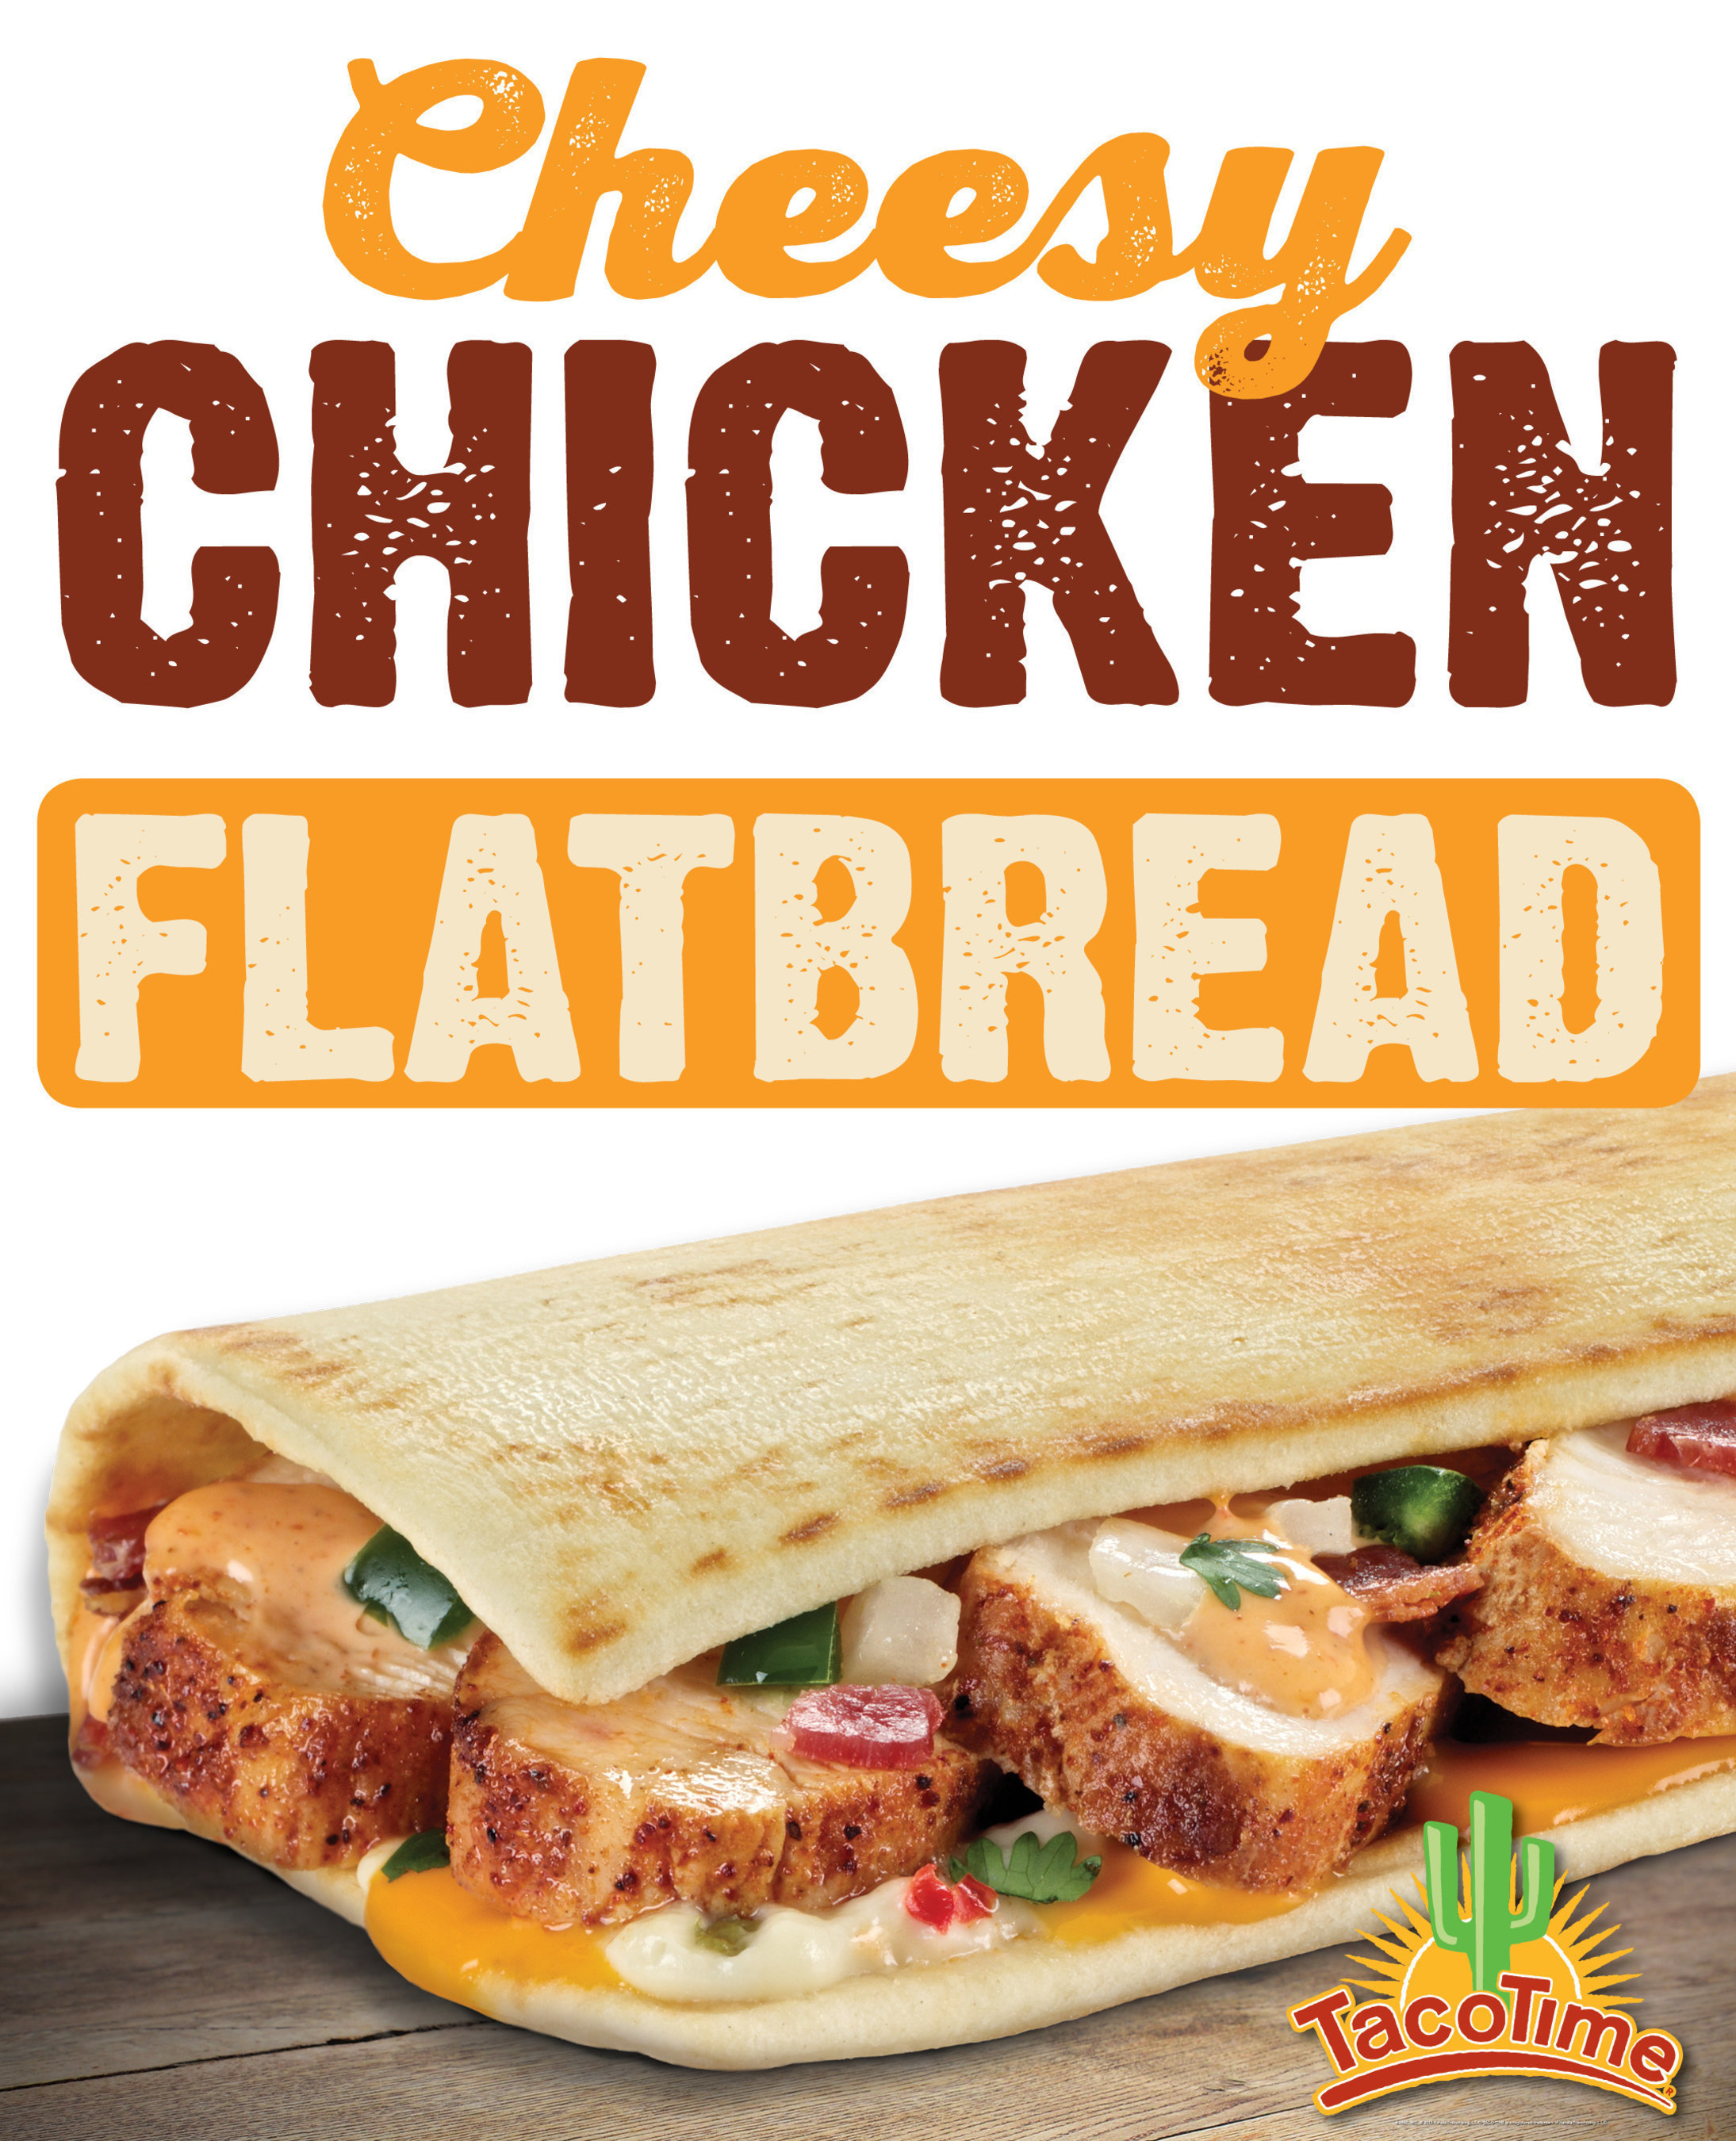 TacoTime Offers NEW Cheesy Chicken Flatbread Through June 30